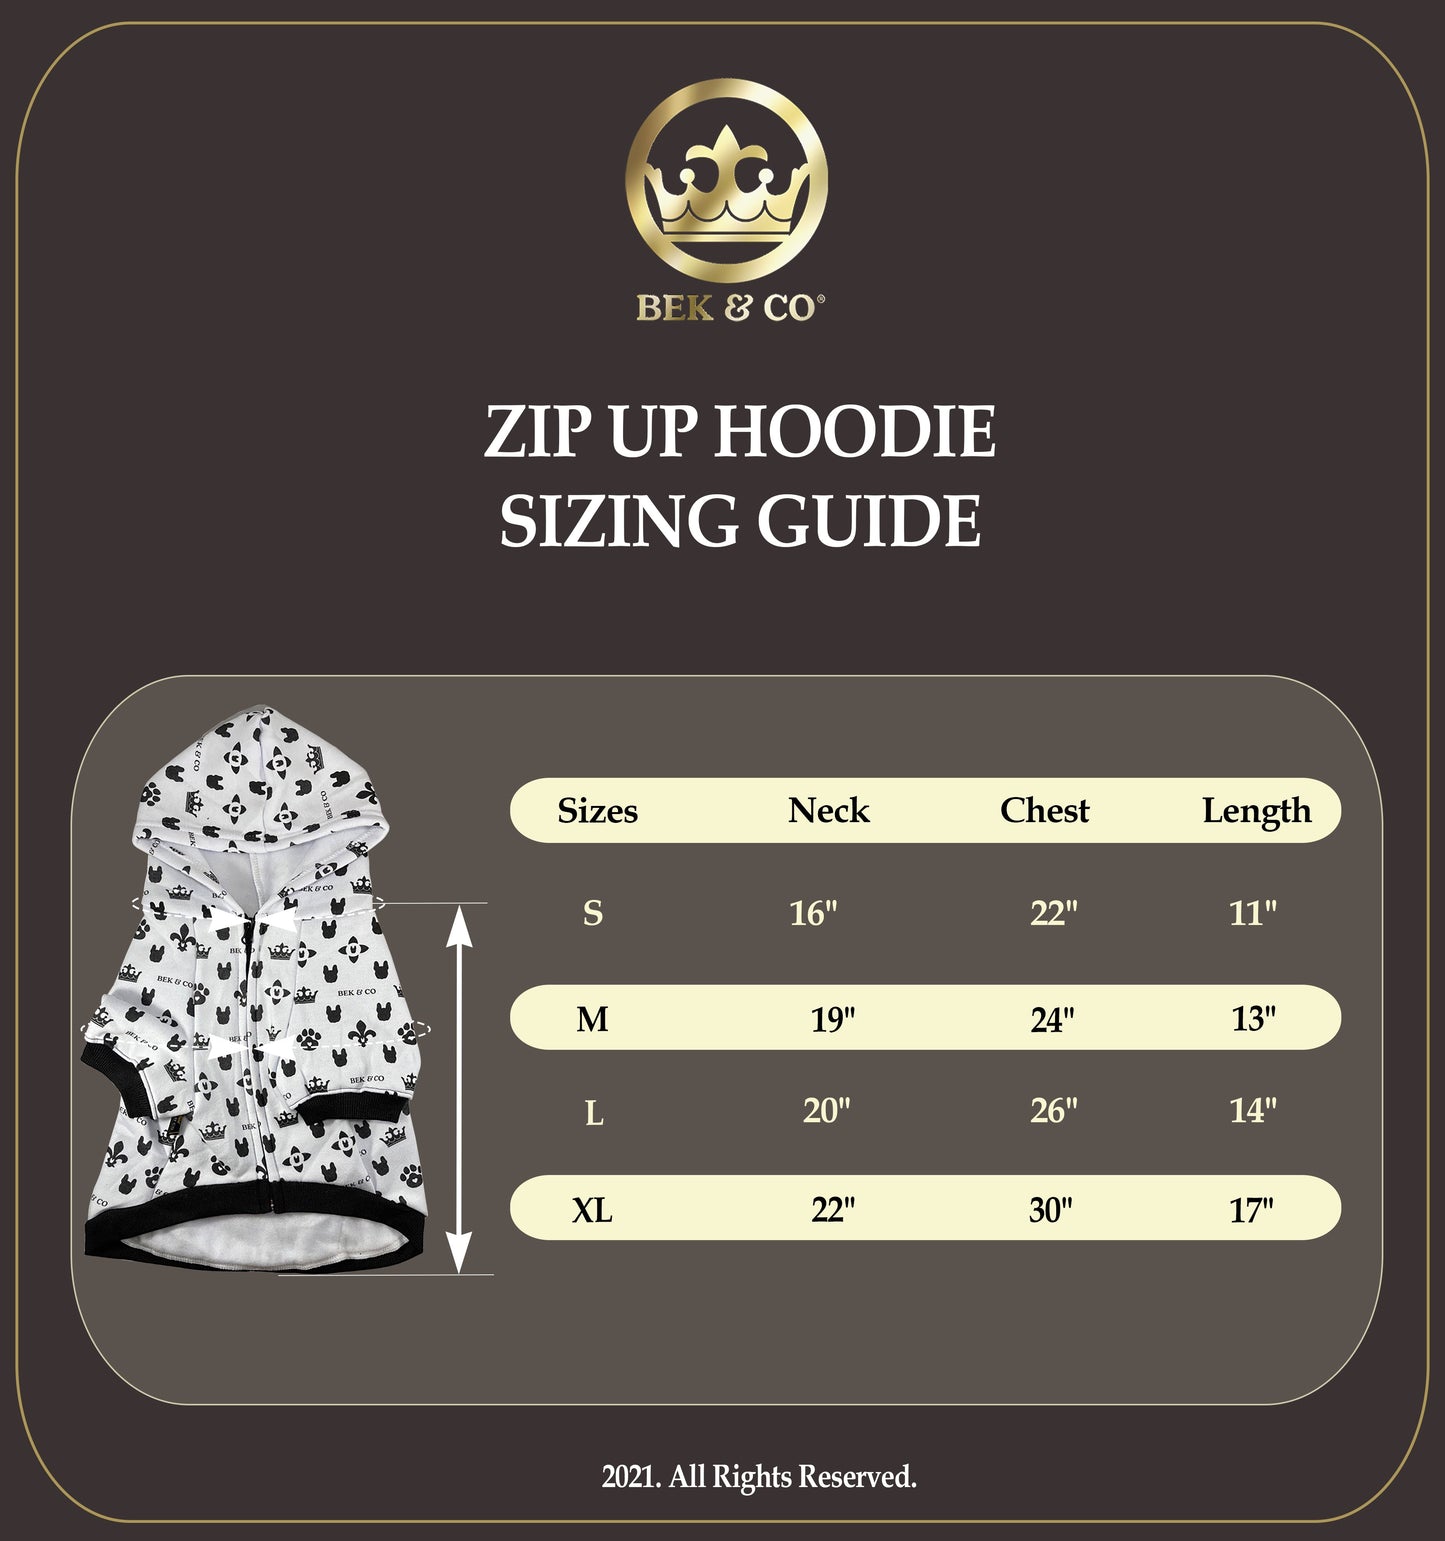 French Bulldog zip up hoodie sizing guide infographic